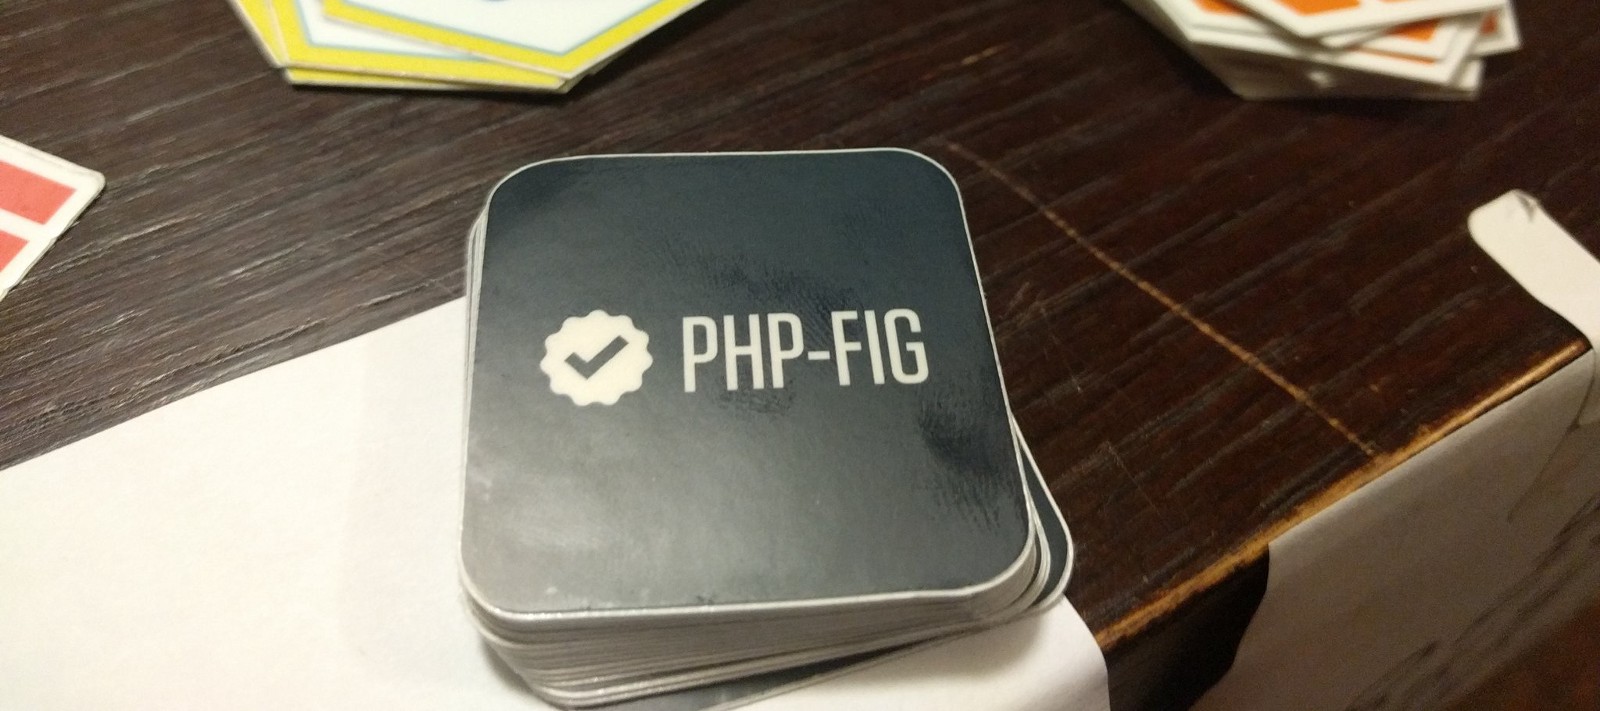 PHP-FIG stickers, shared at the PHPDay front desk